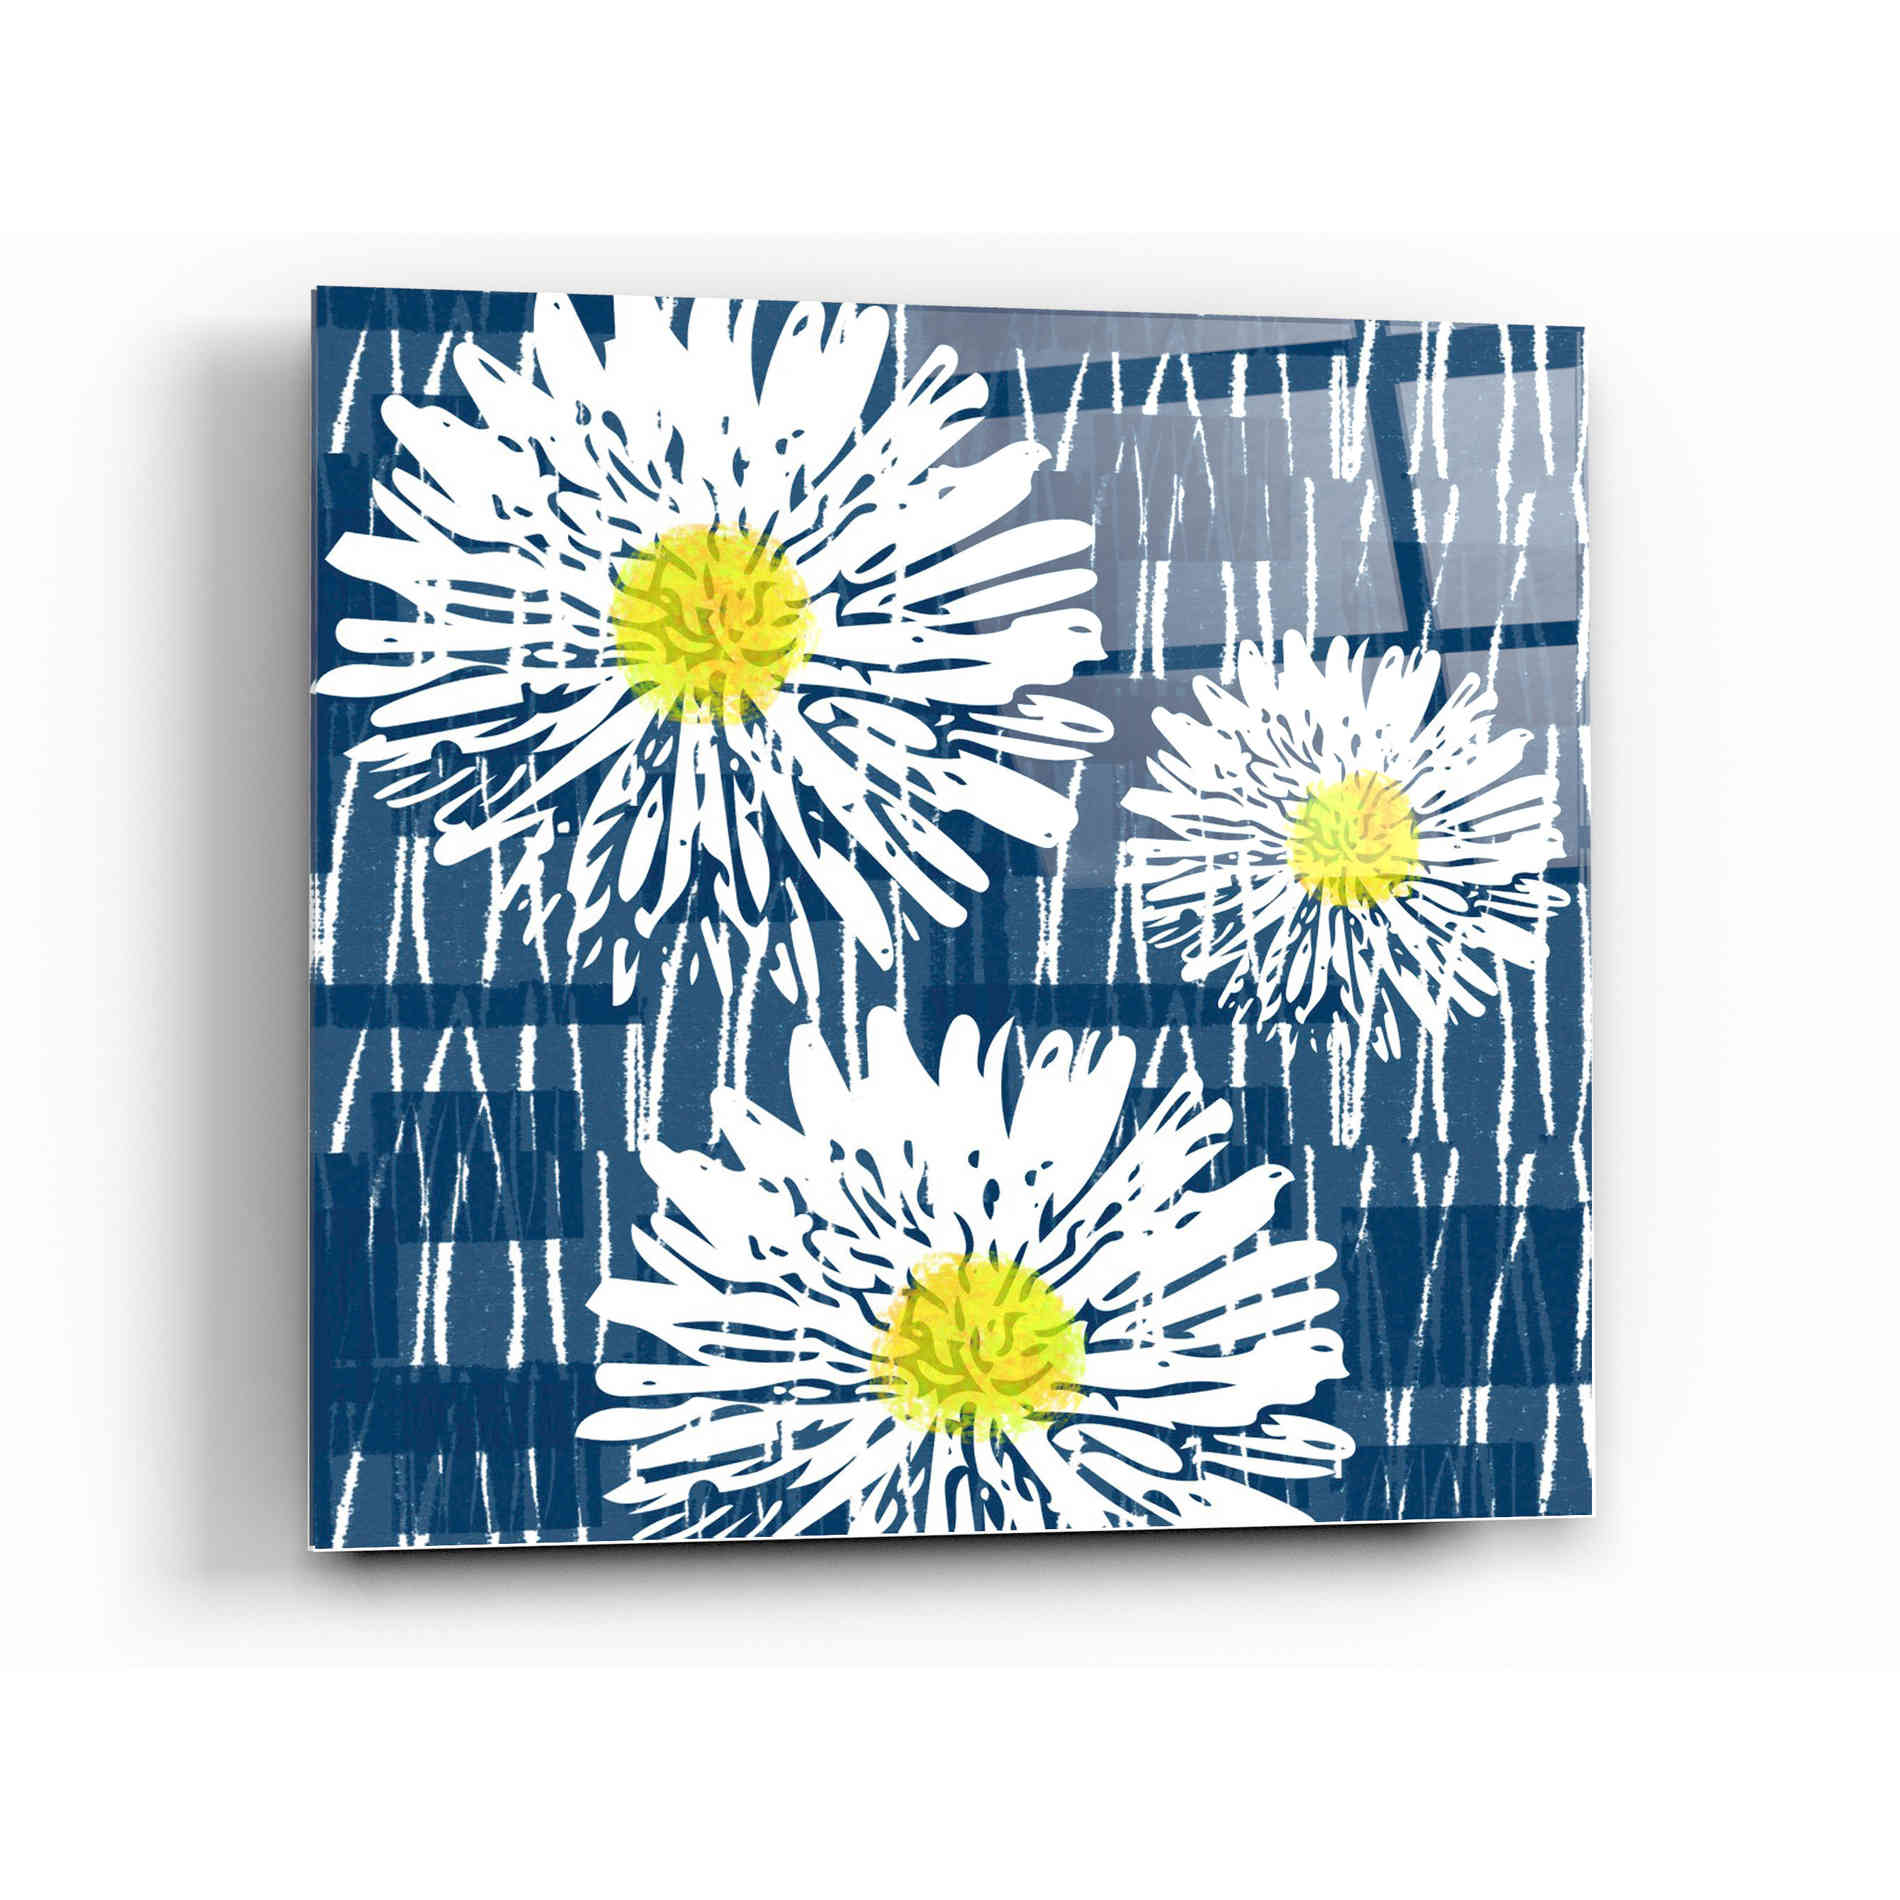 Epic Art 'White Flowers on Blue' by Linda Woods, Acrylic Glass Wall Art,12x12